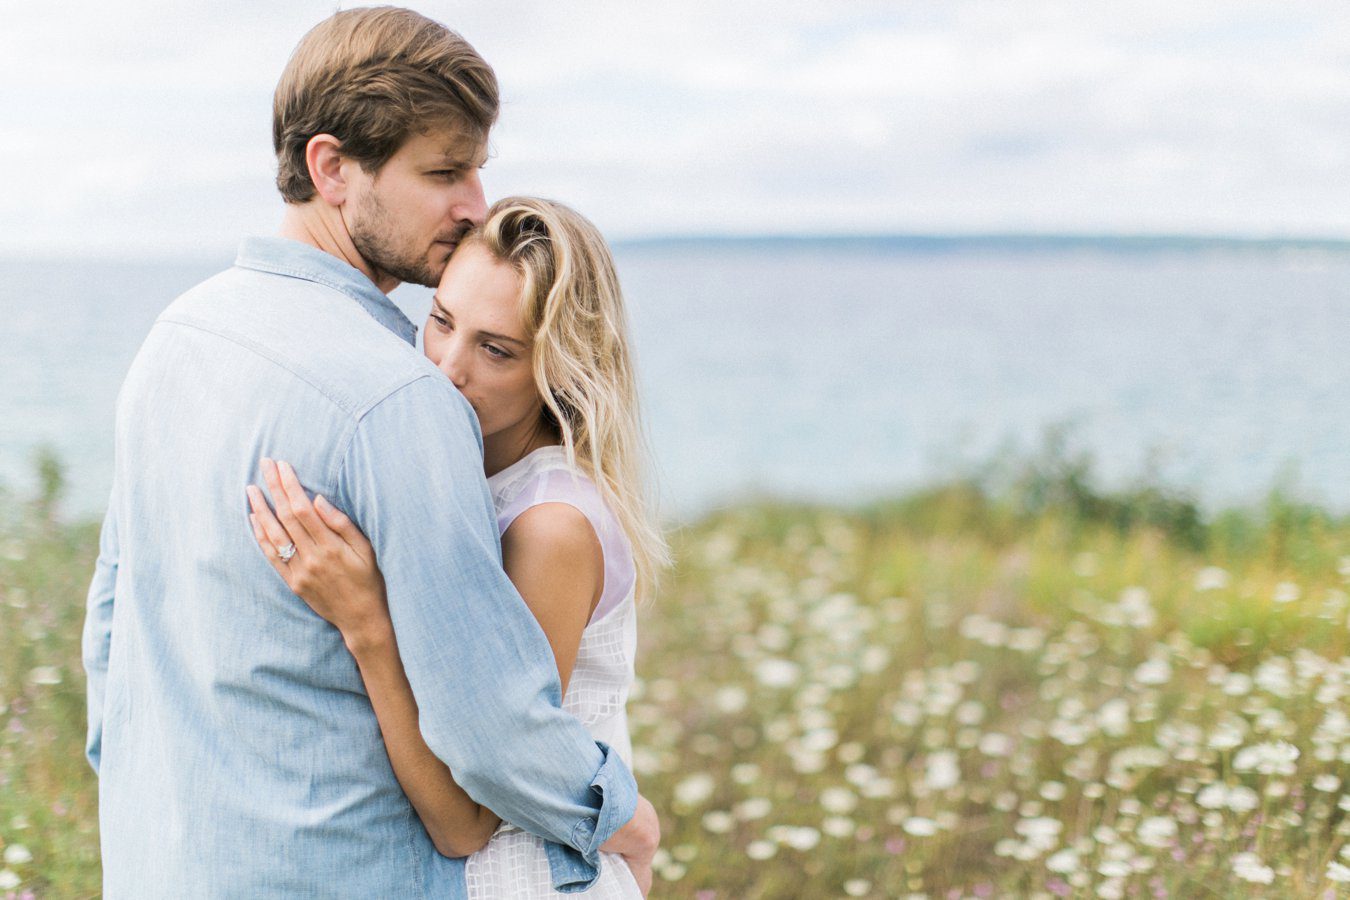 Bay Harbor Engagement Photography | Summer wildflowers | Cory Weber Photography